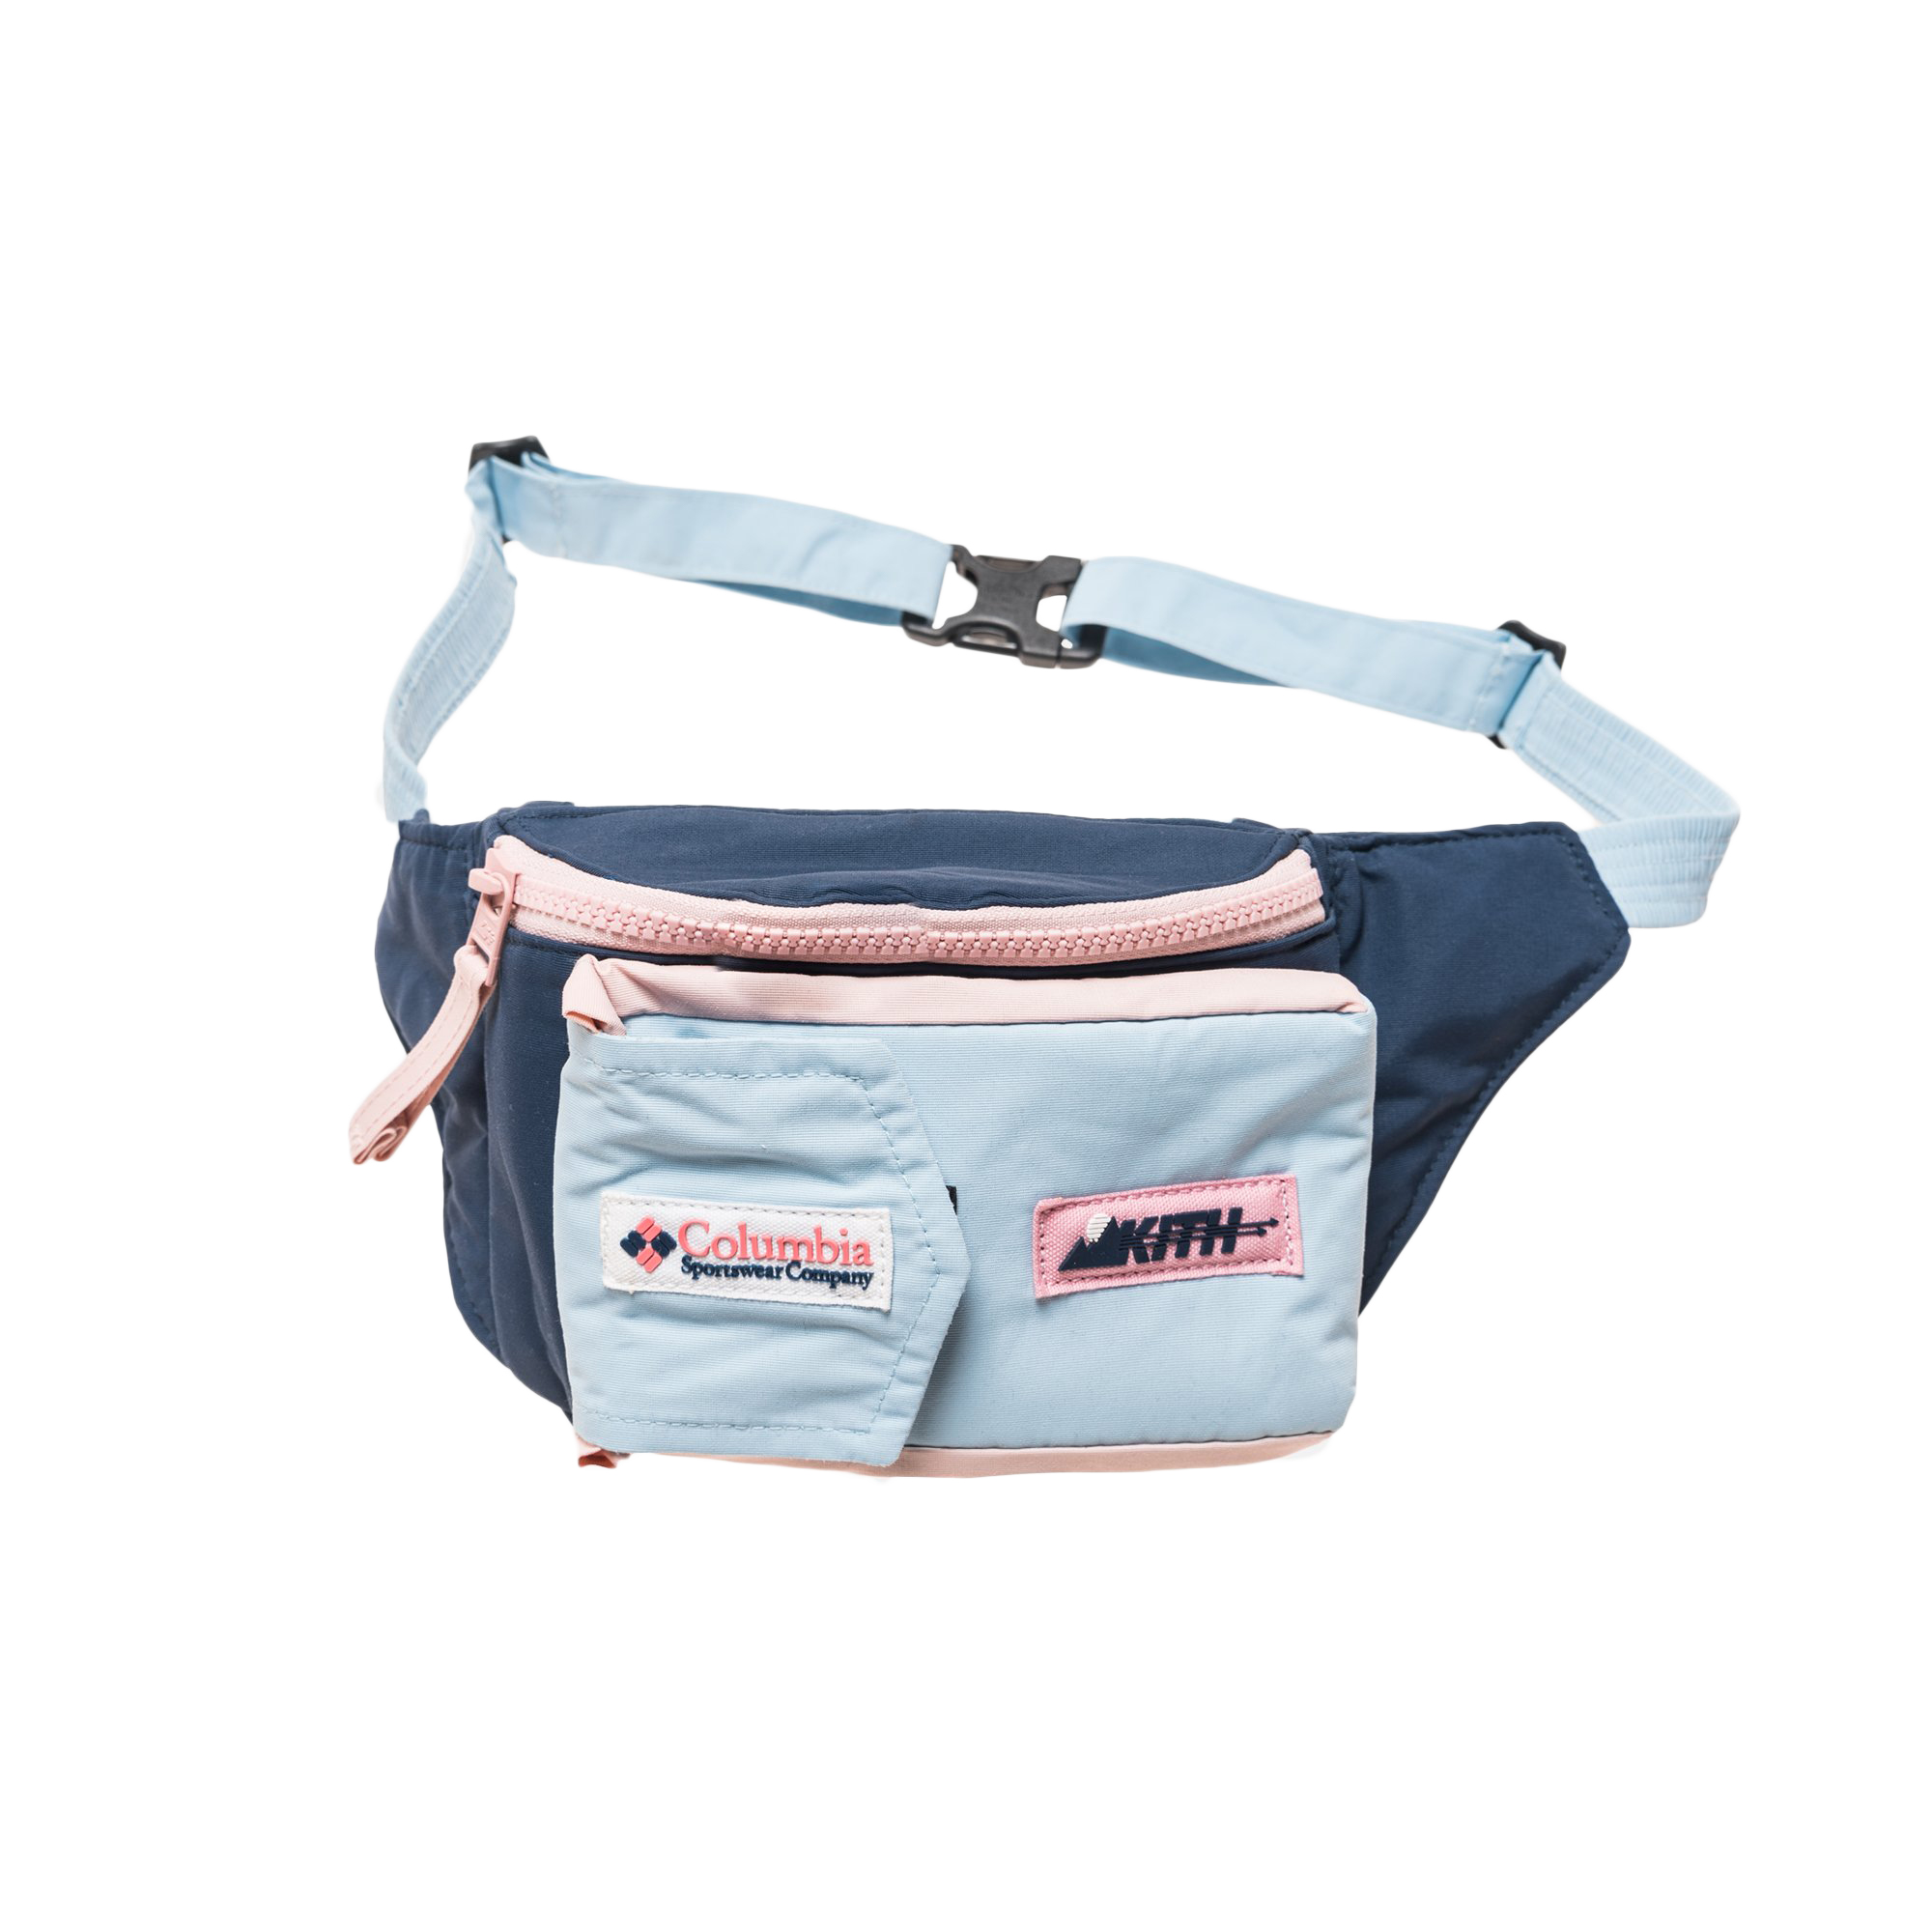 Kith x Columbia Popo Sling Pack Navy - SS18 - US